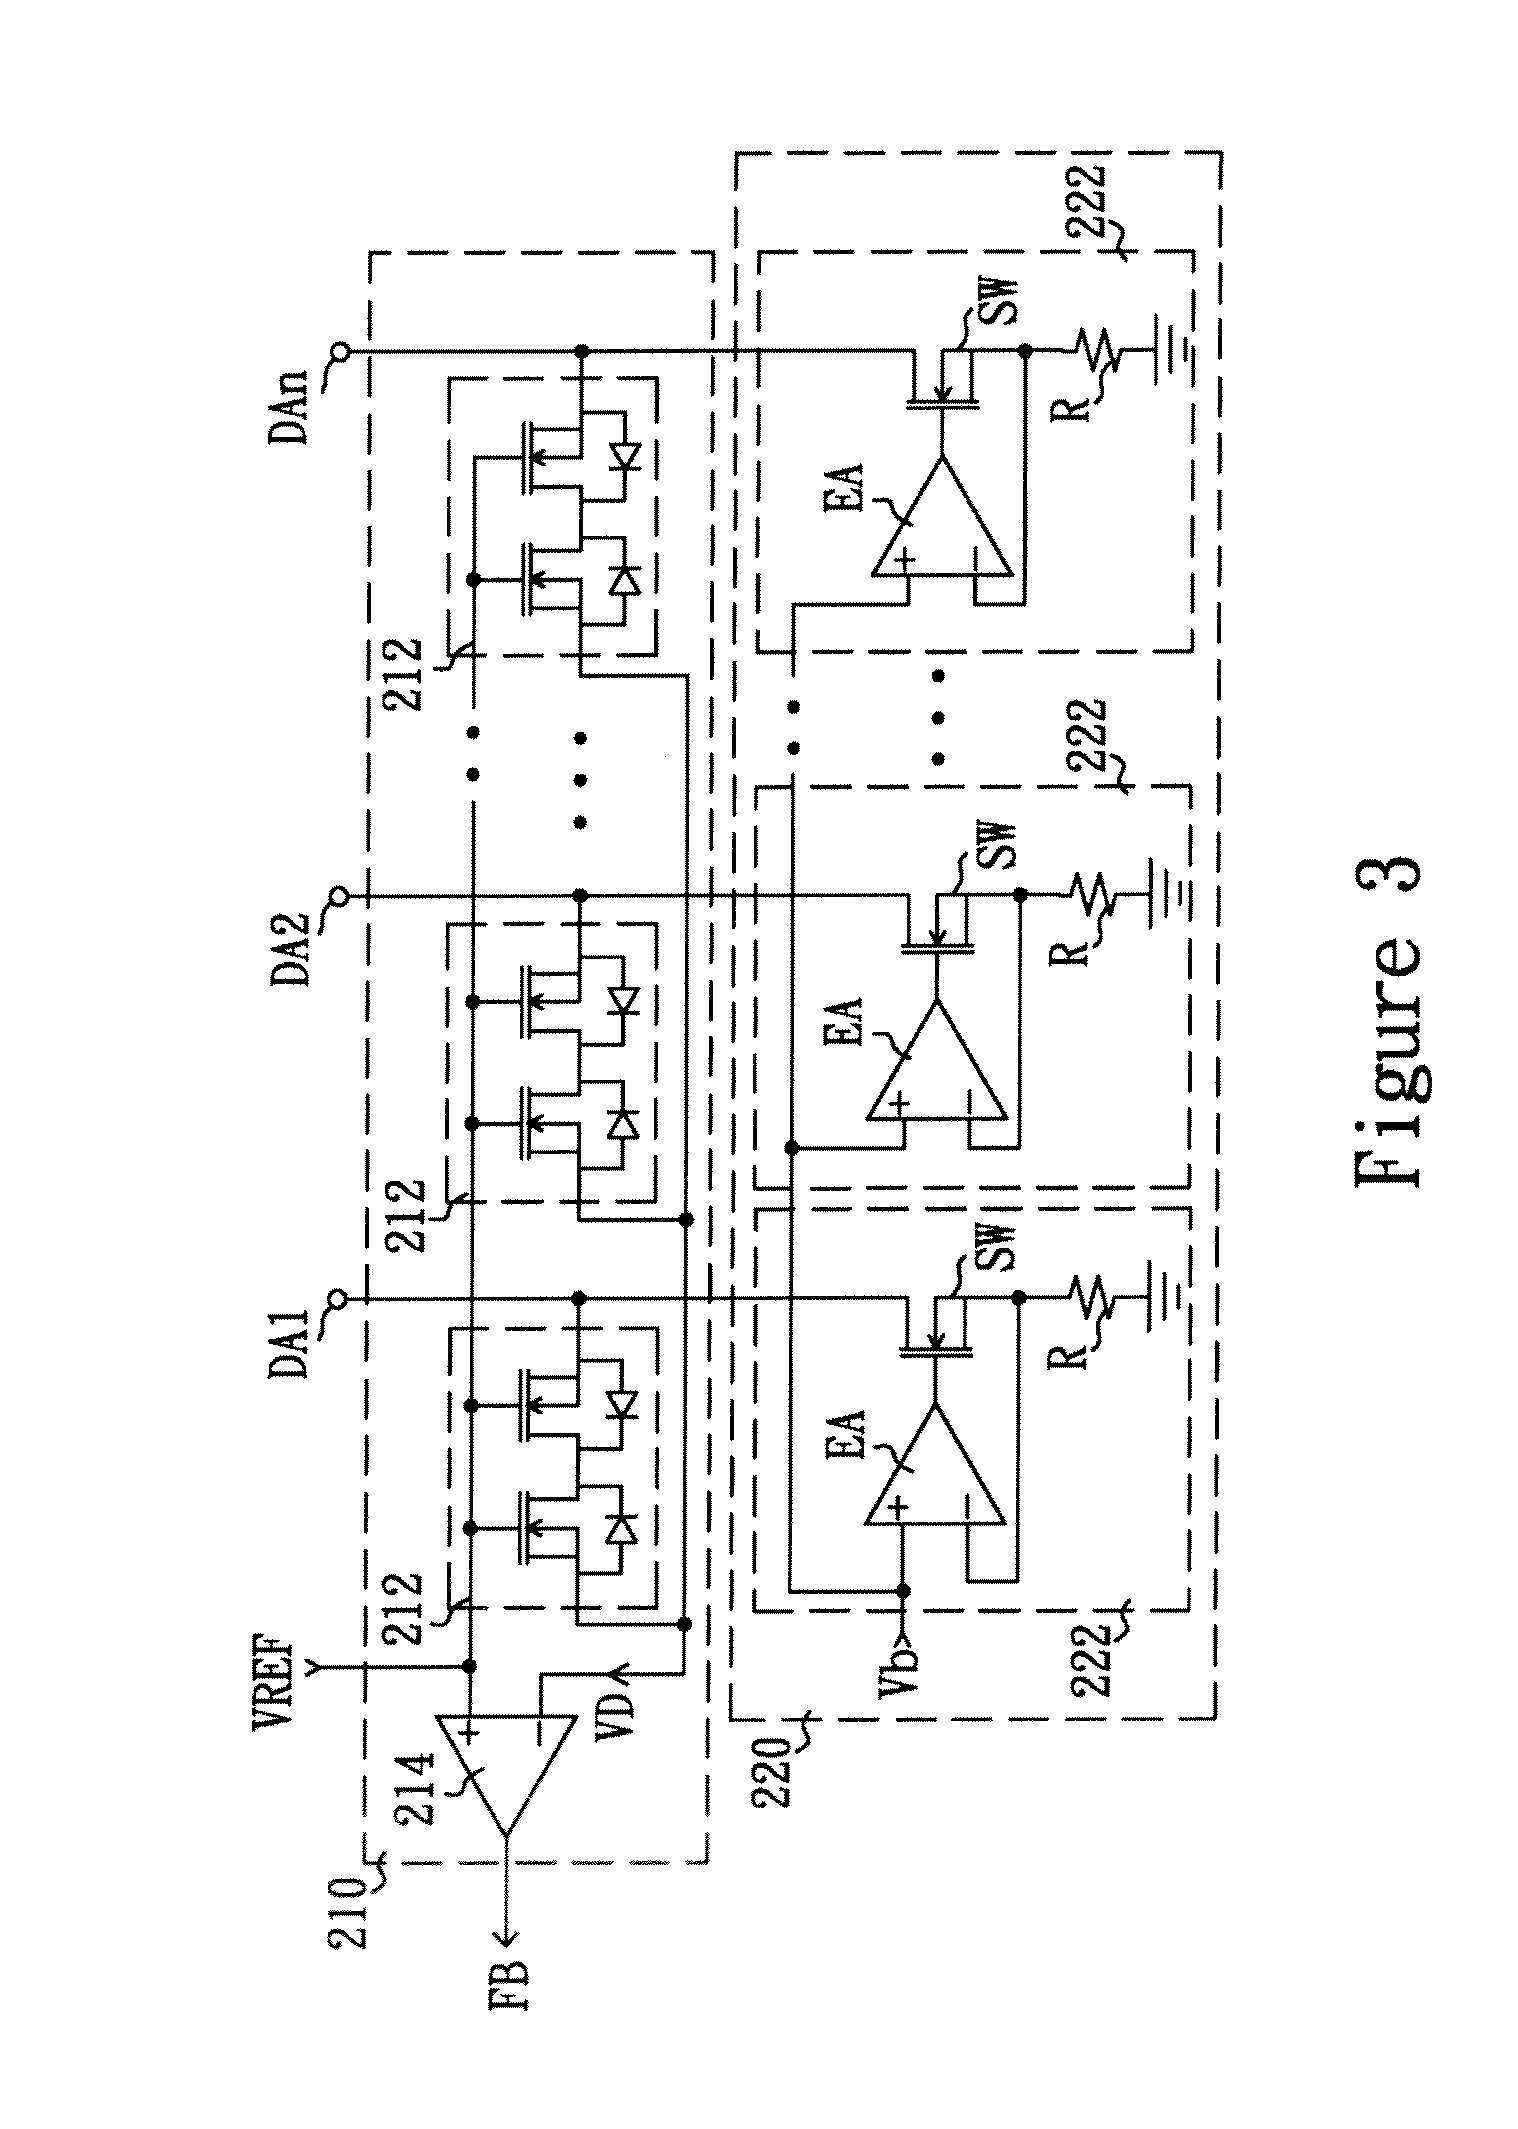 Load driving circuit and multi-load feedback circuit